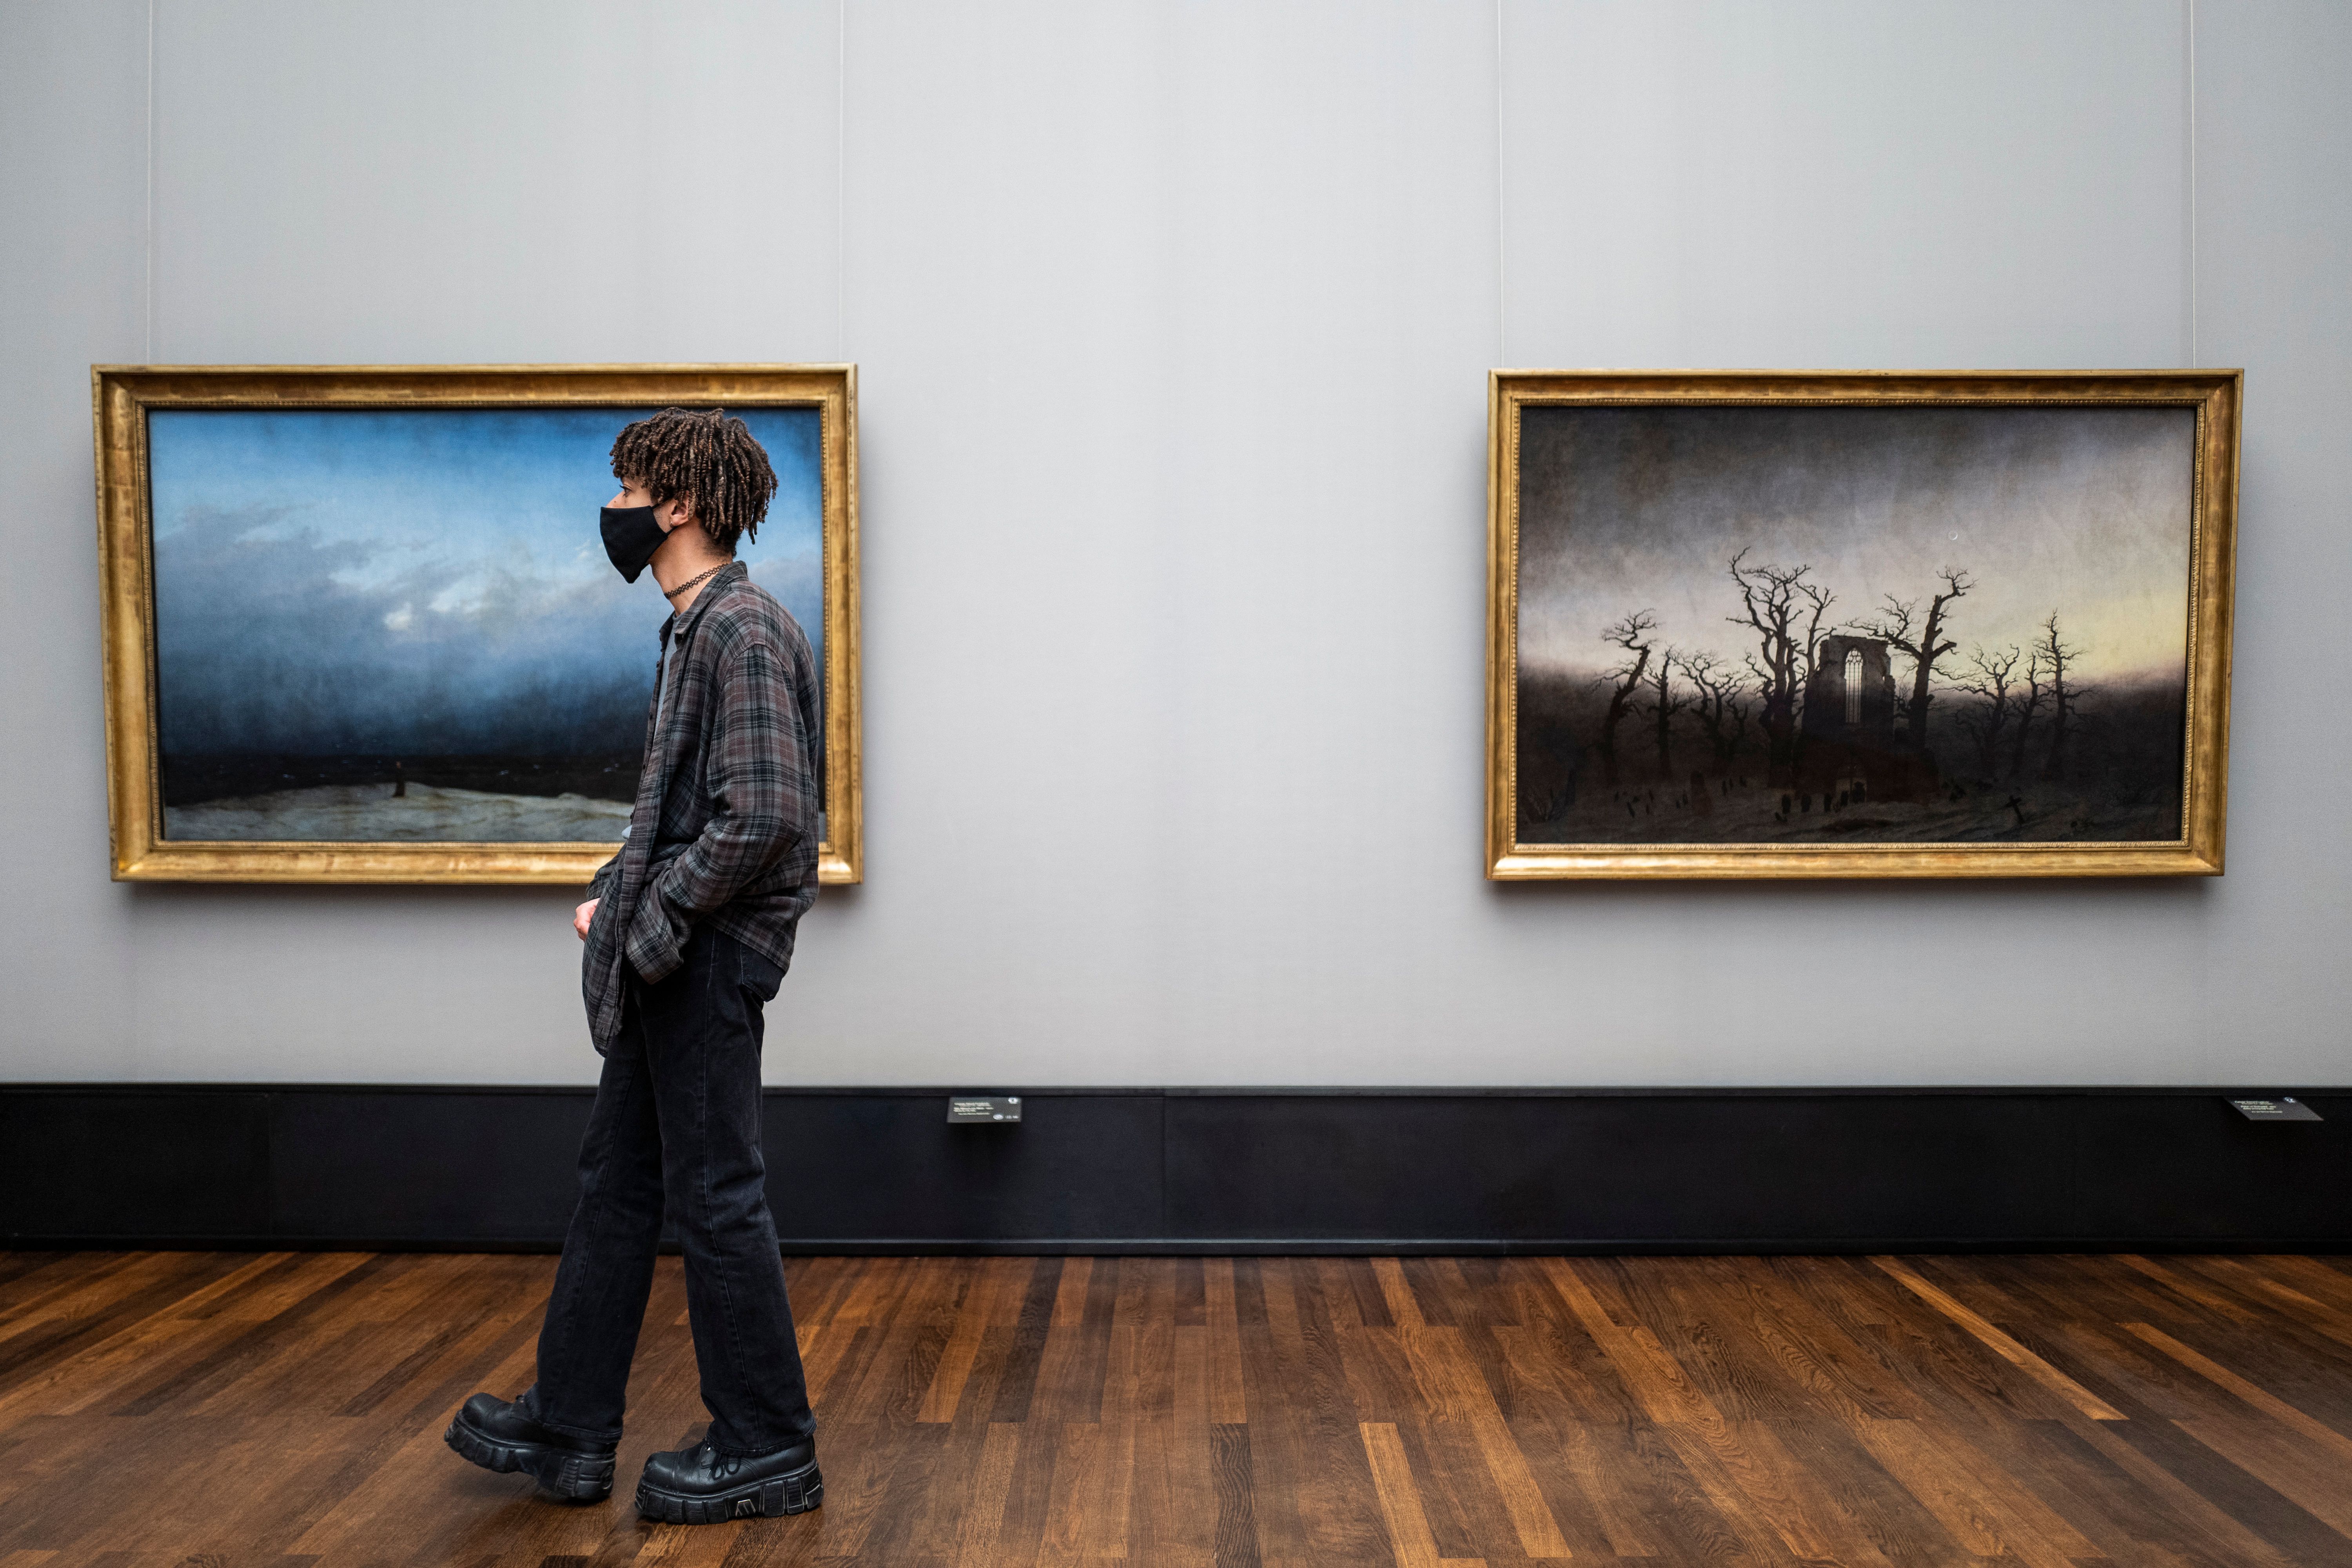 A visitor wearing a face mask walks past two paintings by Caspar David Friedrich at the Alte Nationalgalerie (Old National Gallery) museum in Berlin on May 12, 2020. (Photo by JOHN MACDOUGALL/AFP via Getty Images)